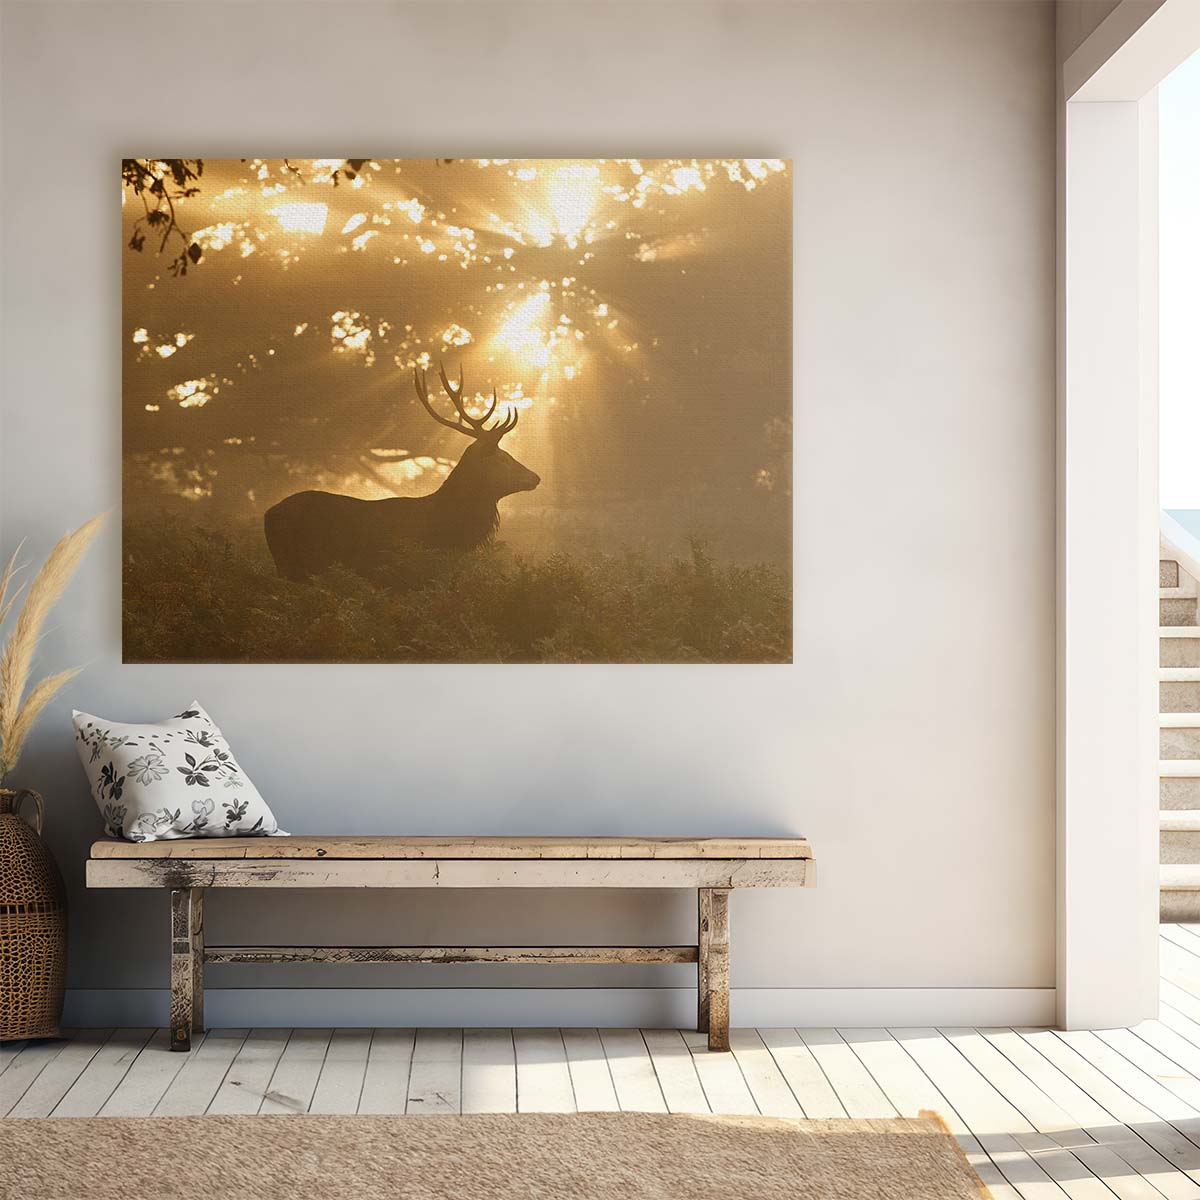 Majestic Sunrise & Stag Silhouette Forest Wall Art by Luxuriance Designs. Made in USA.